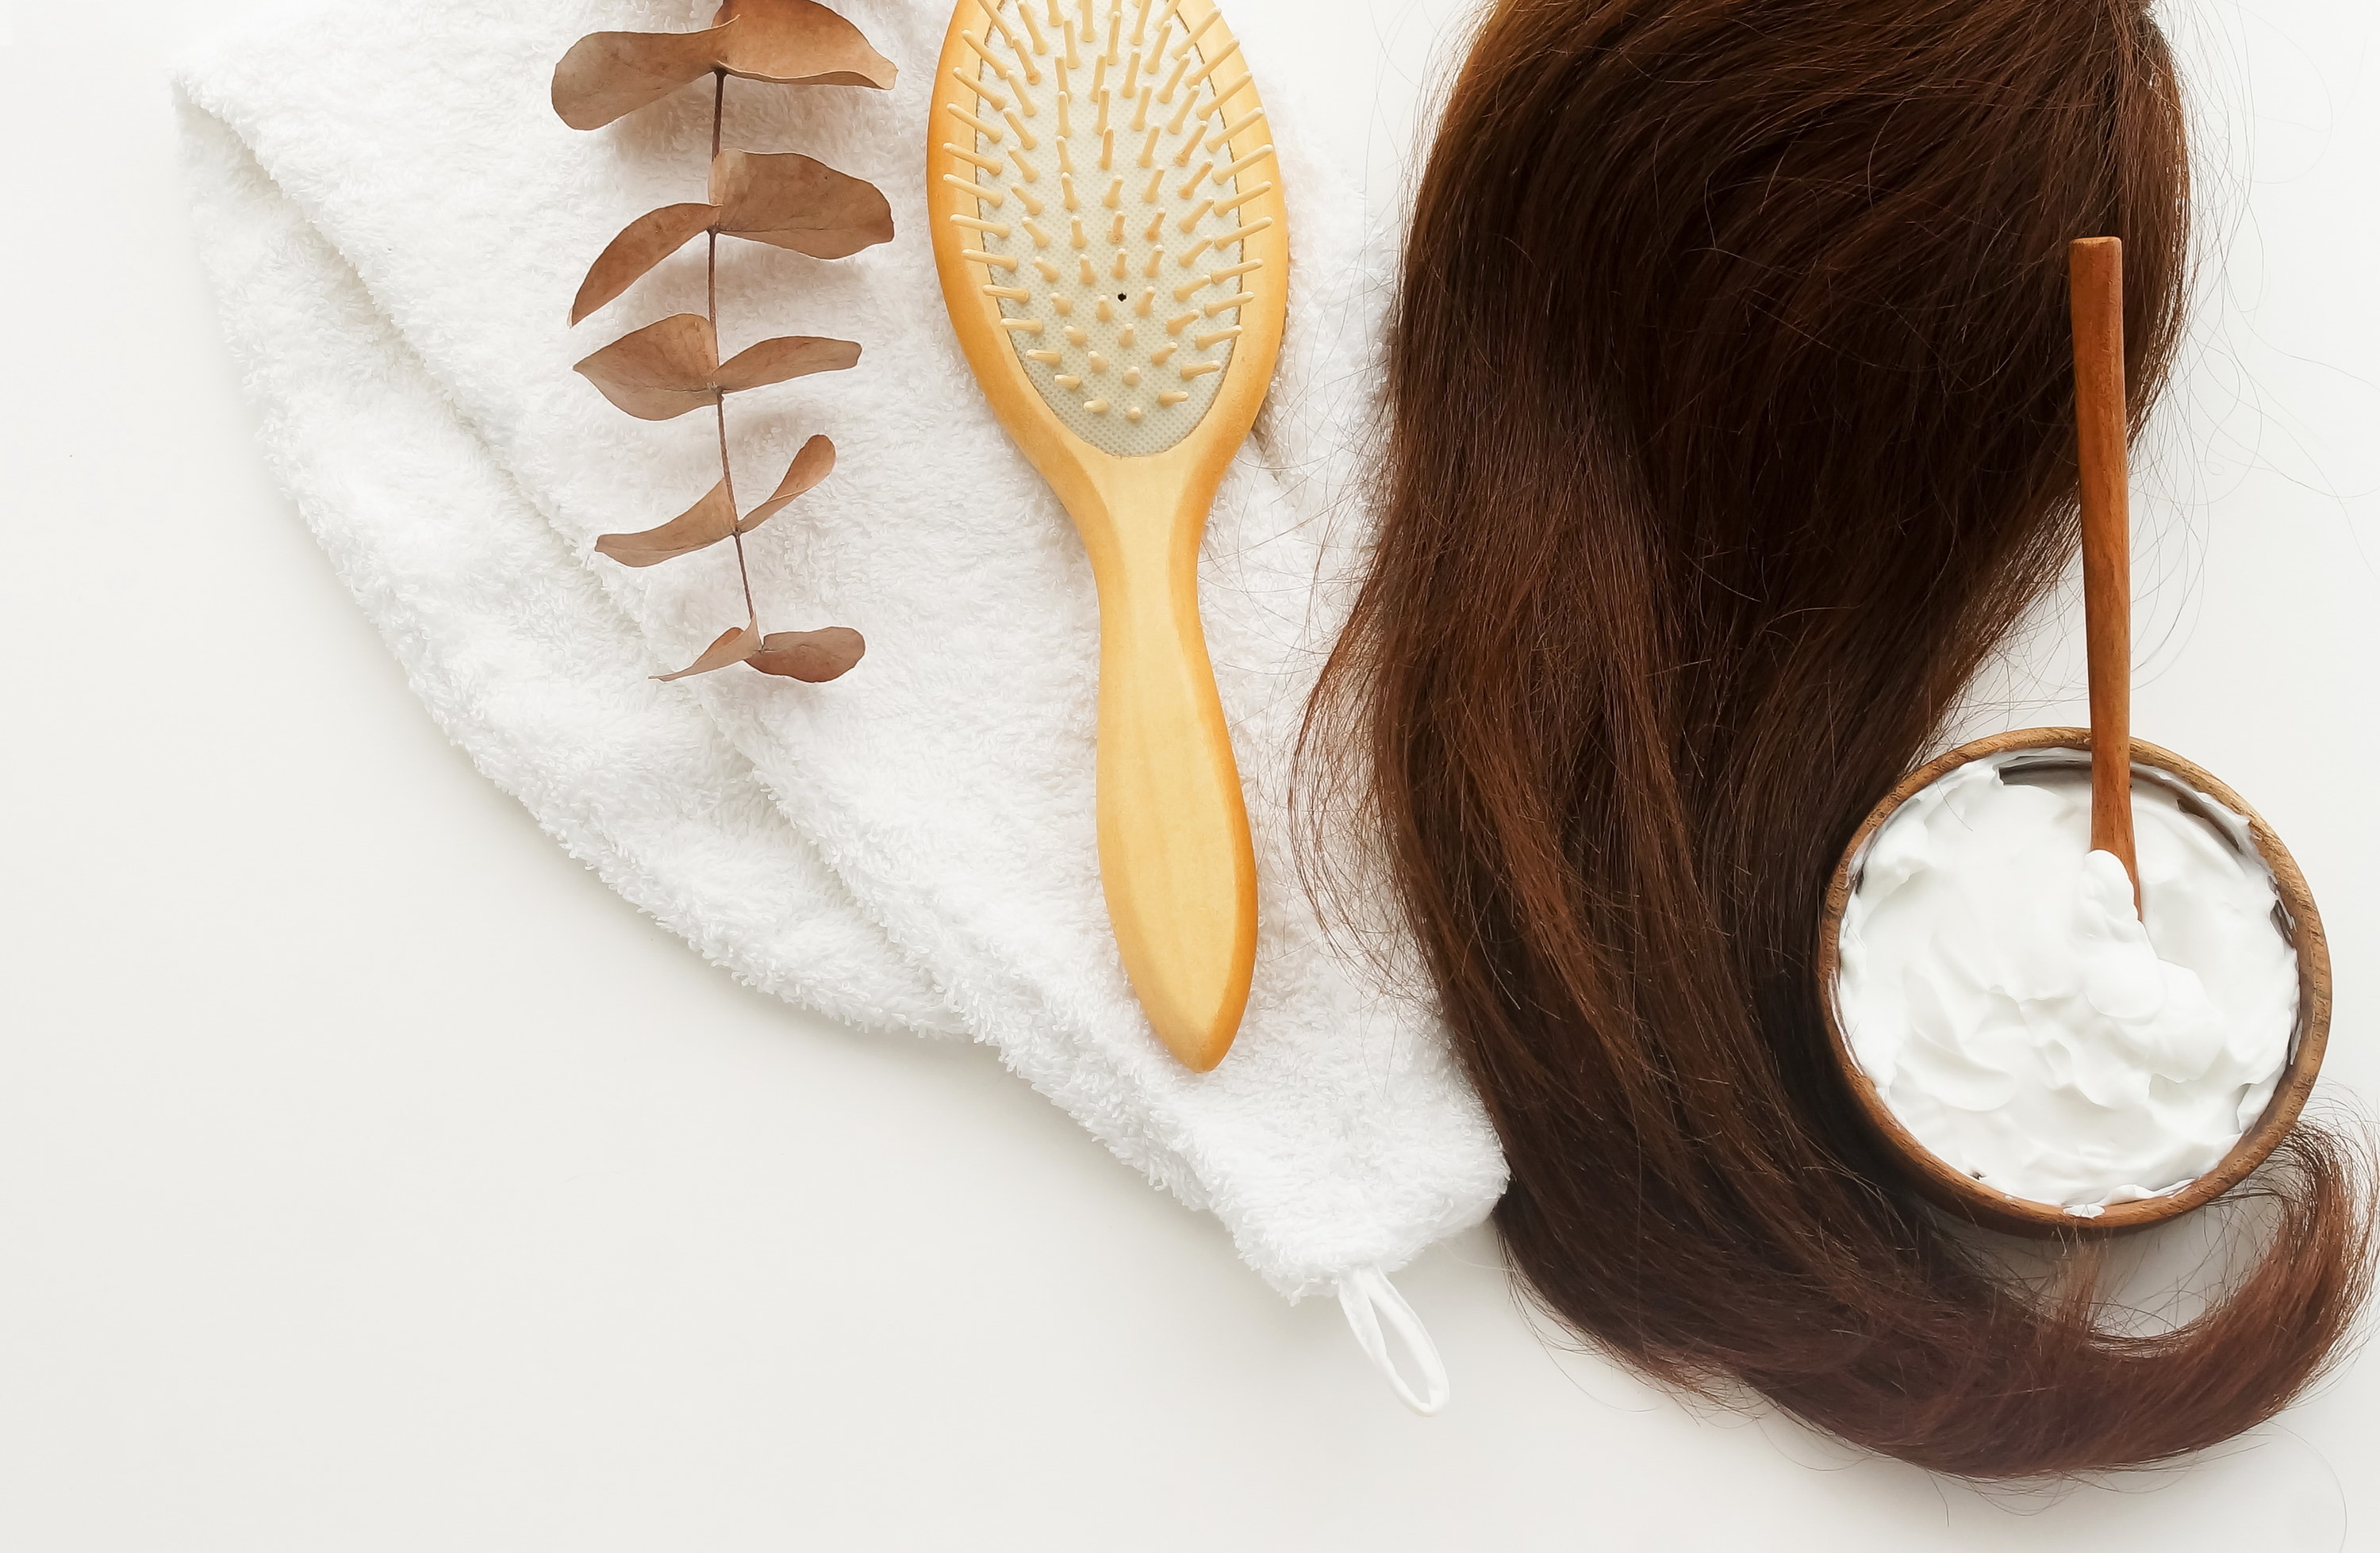 A brush, hair, and a bowl of hair mask laying on a white towel